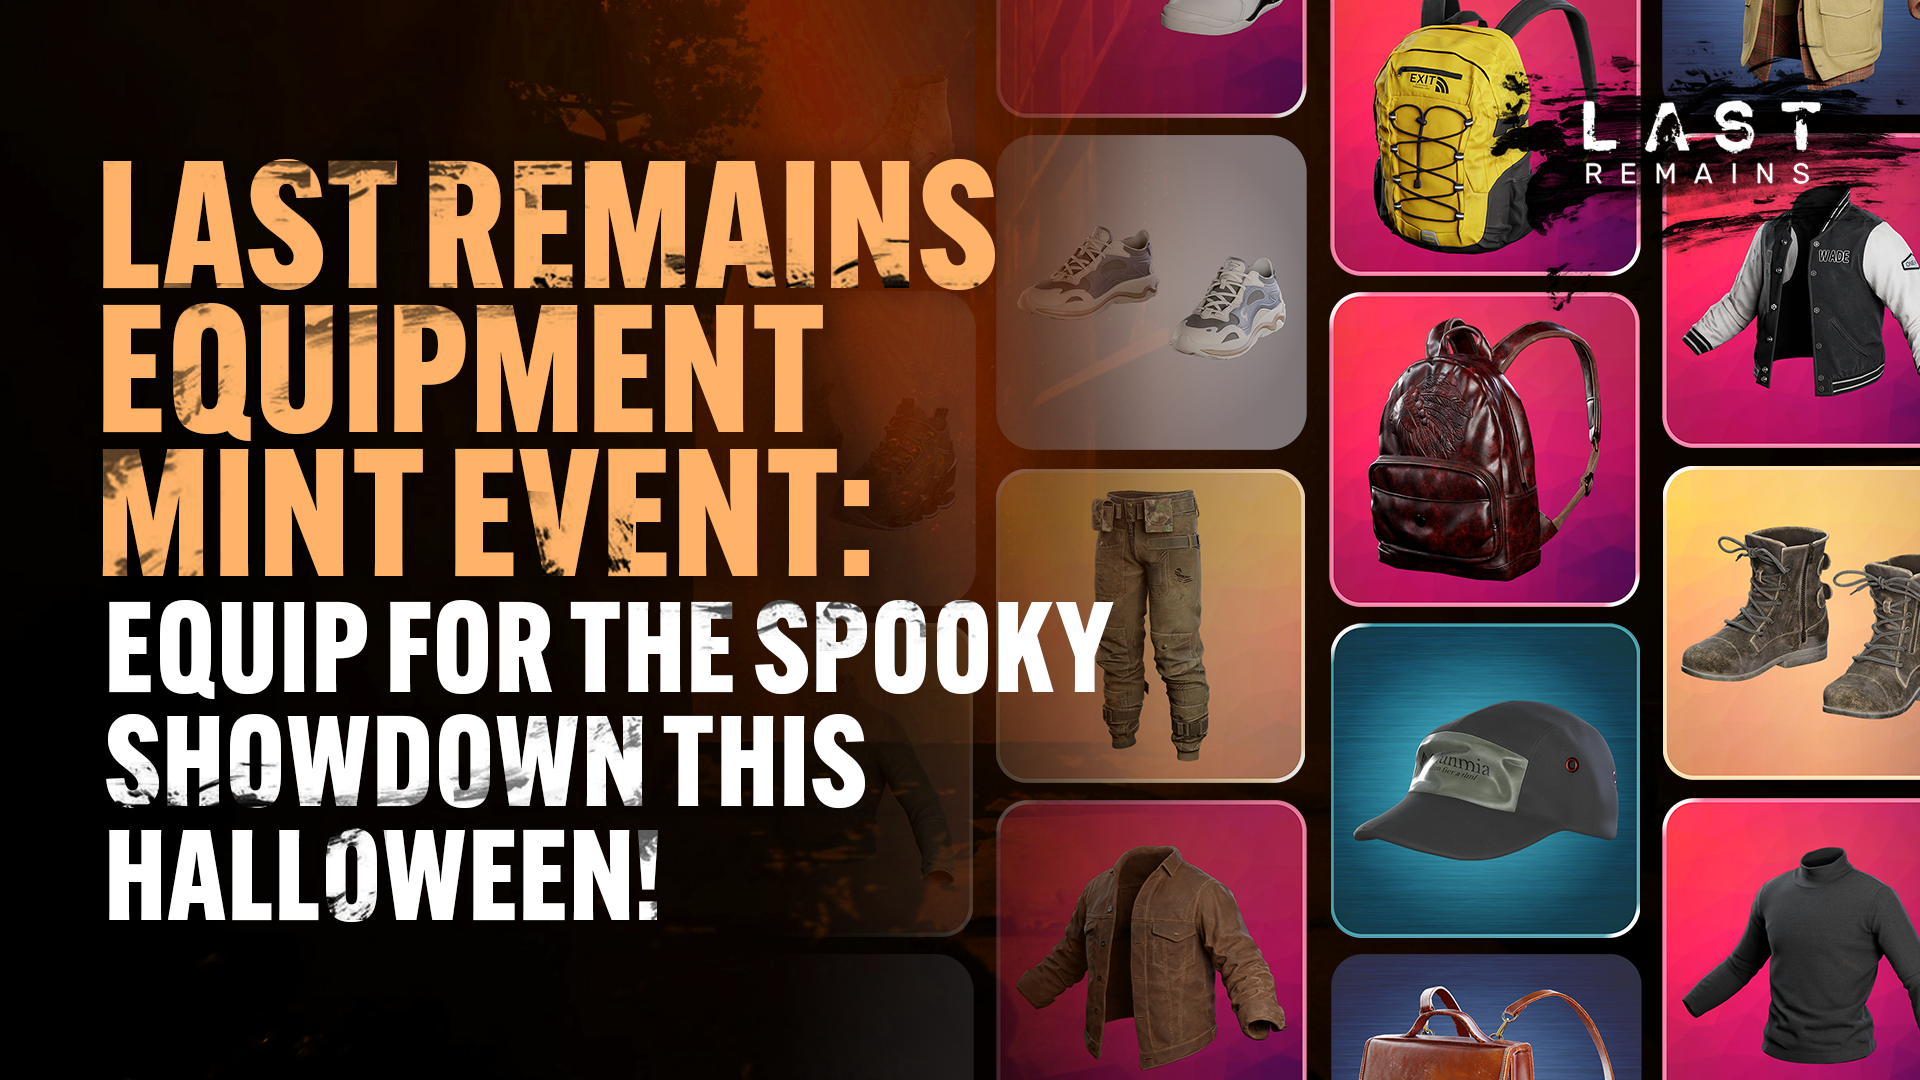 Last Remains Equipment Mint Event: Equip for the Spooky Showdown this Halloween!